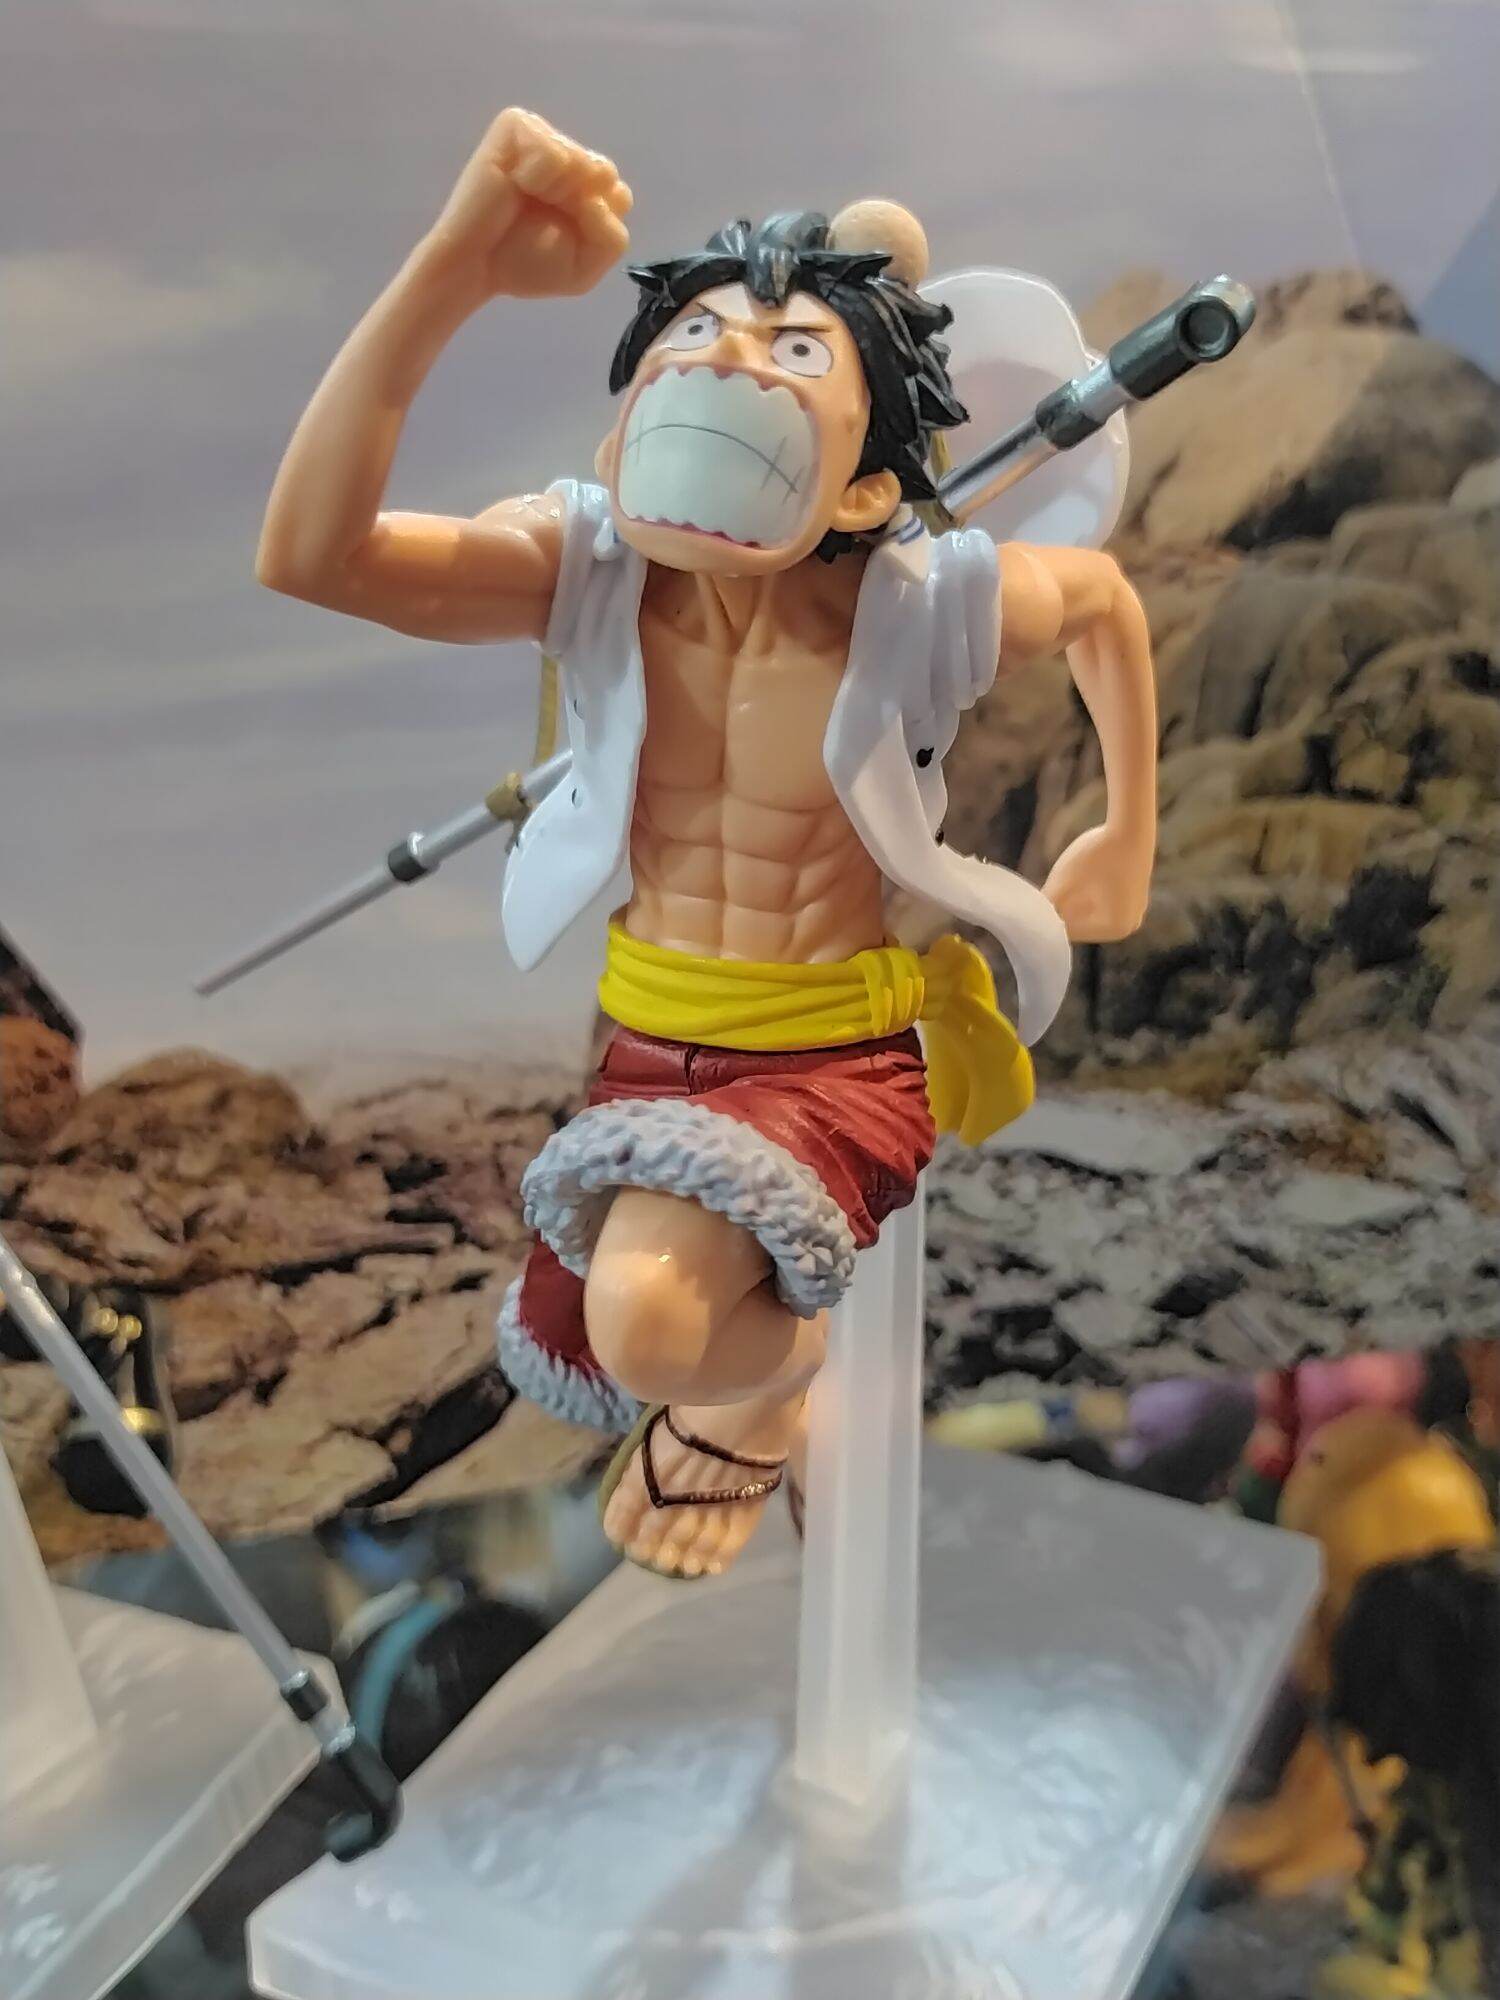 Luffy Action Figure Anime Statues Character Model Cool Toy Dolls Car Home Decorations Collectibles Gifts Games A-25CM QWEIAS One Piece Monkey D